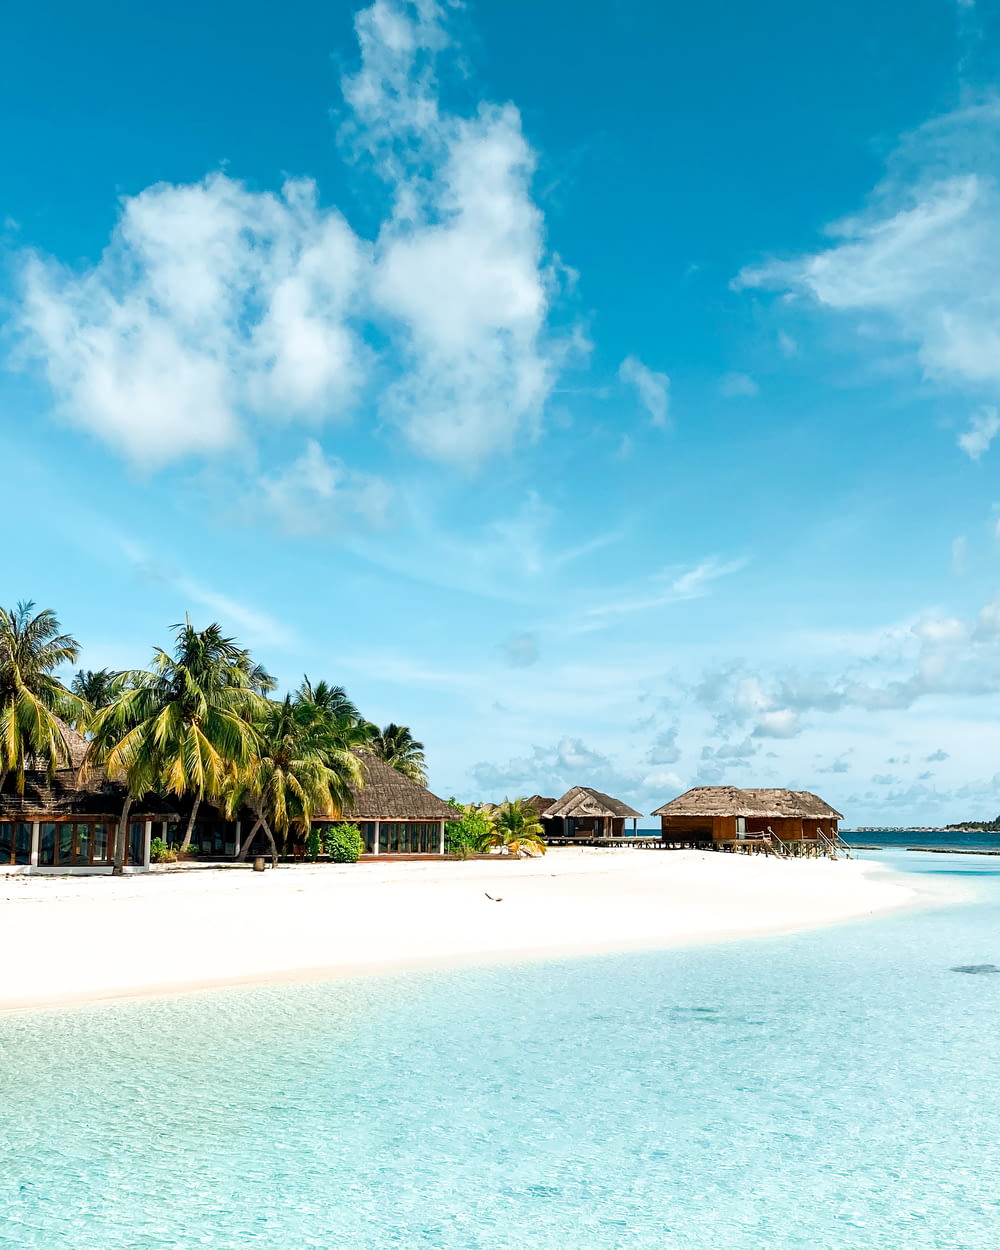 a white sandy beach with palm trees and huts